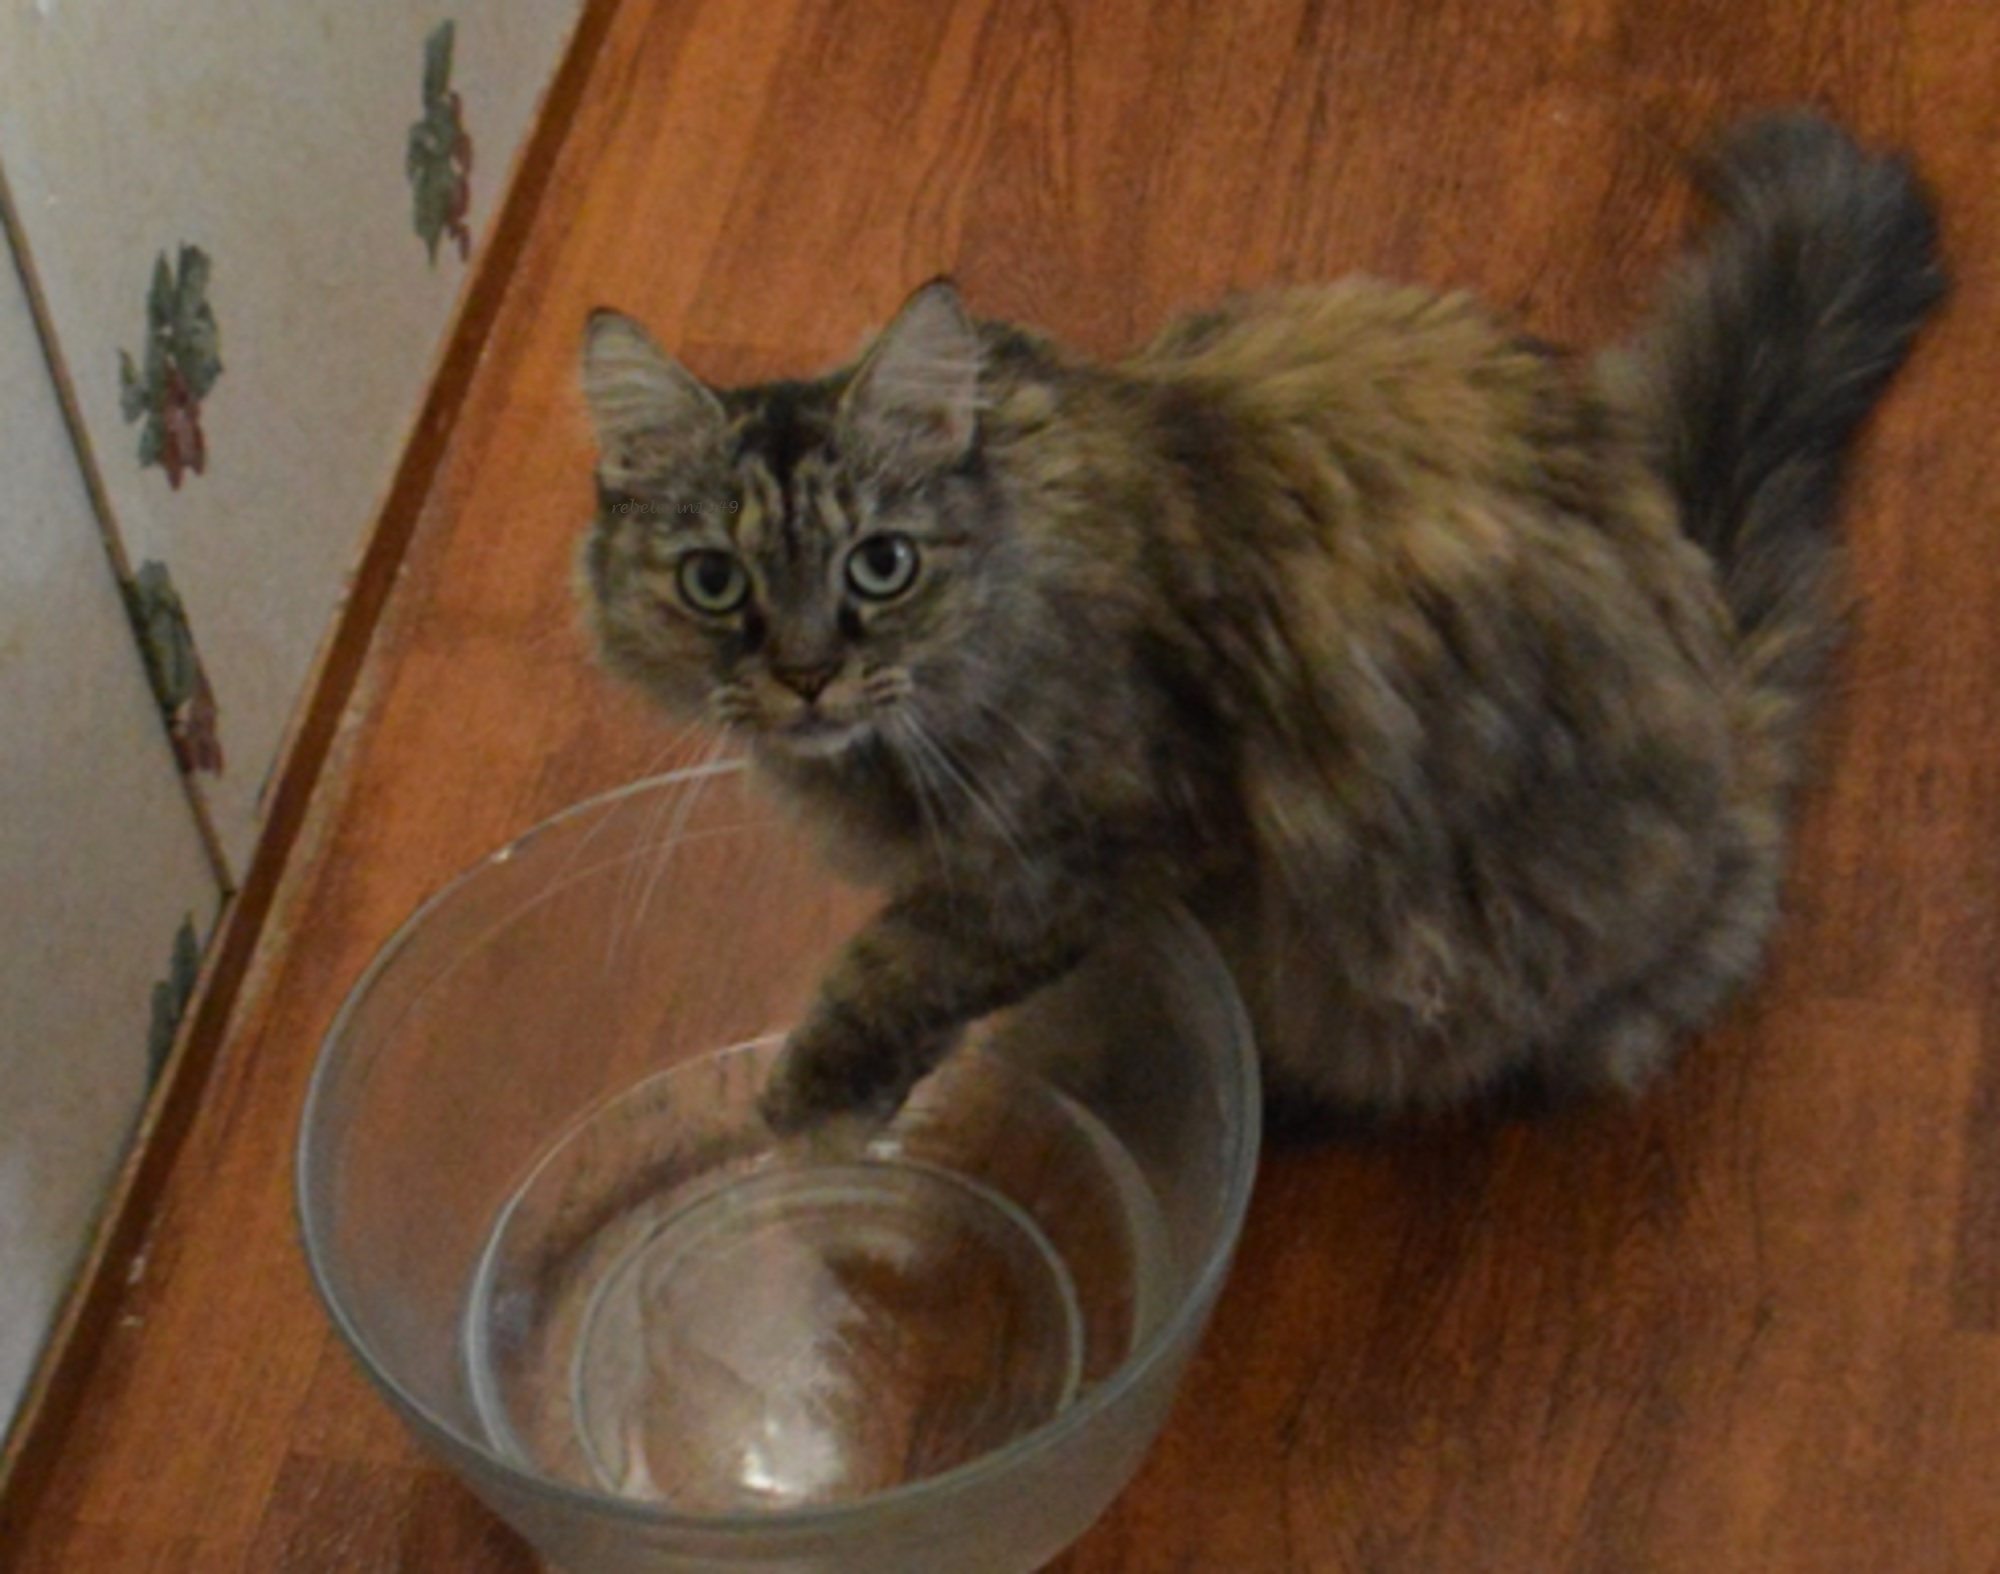 That look on Boobears face, she's letting me know I need to fill the bowl.